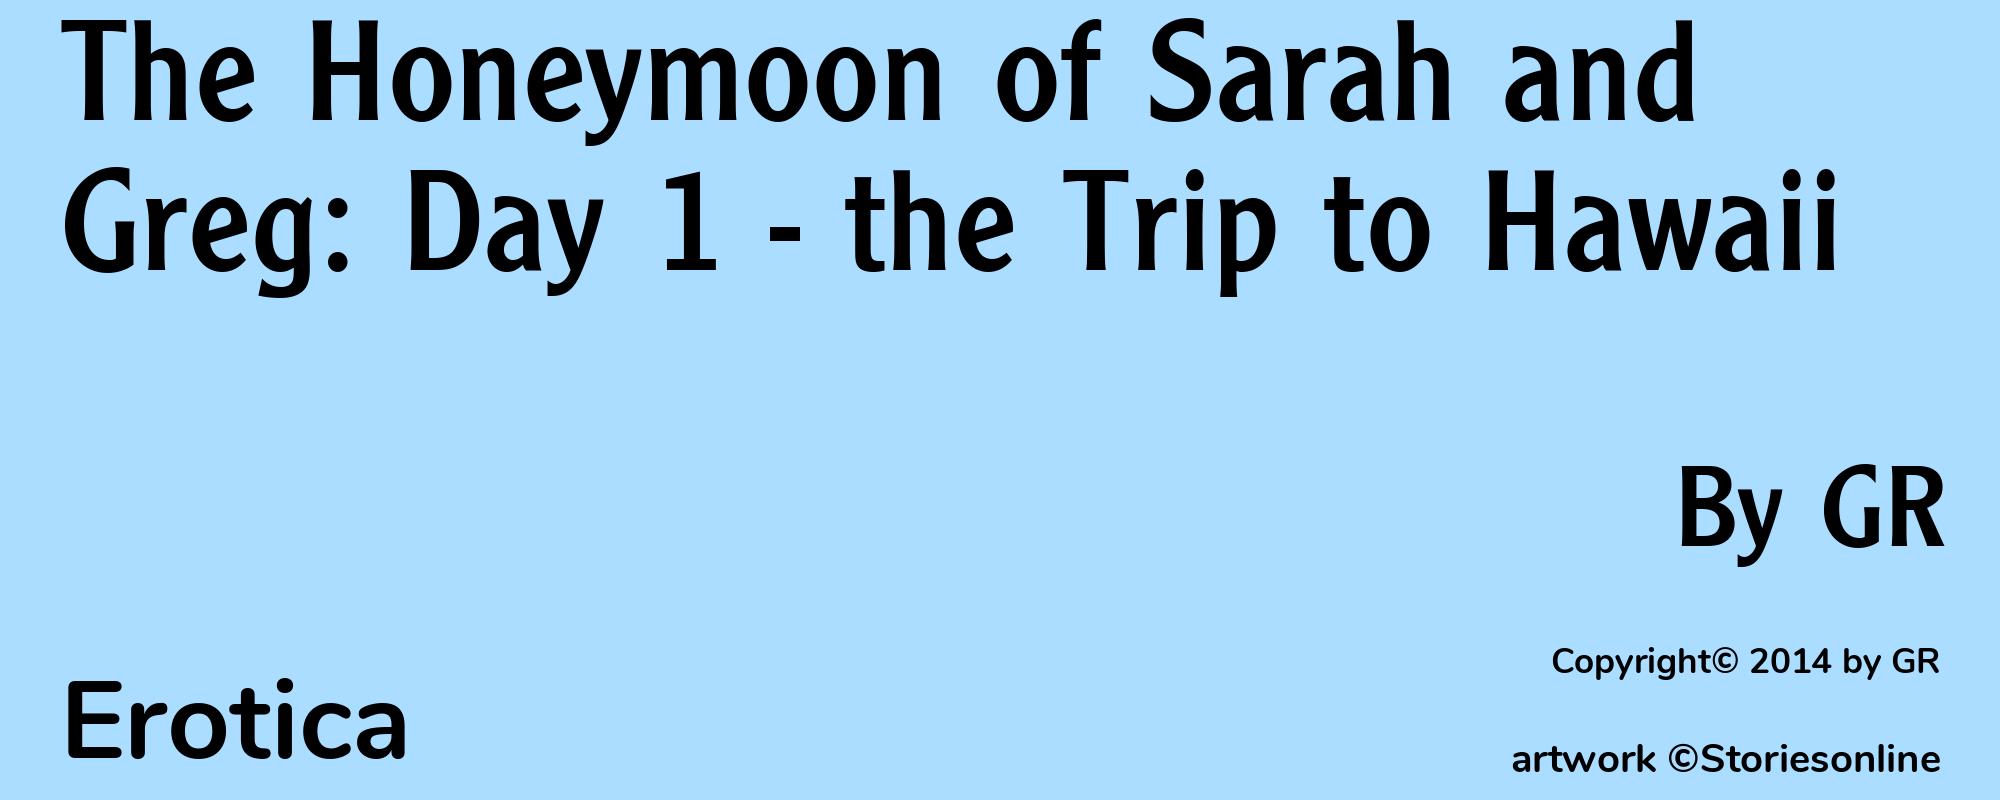 The Honeymoon of Sarah and Greg: Day 1 - the Trip to Hawaii - Cover